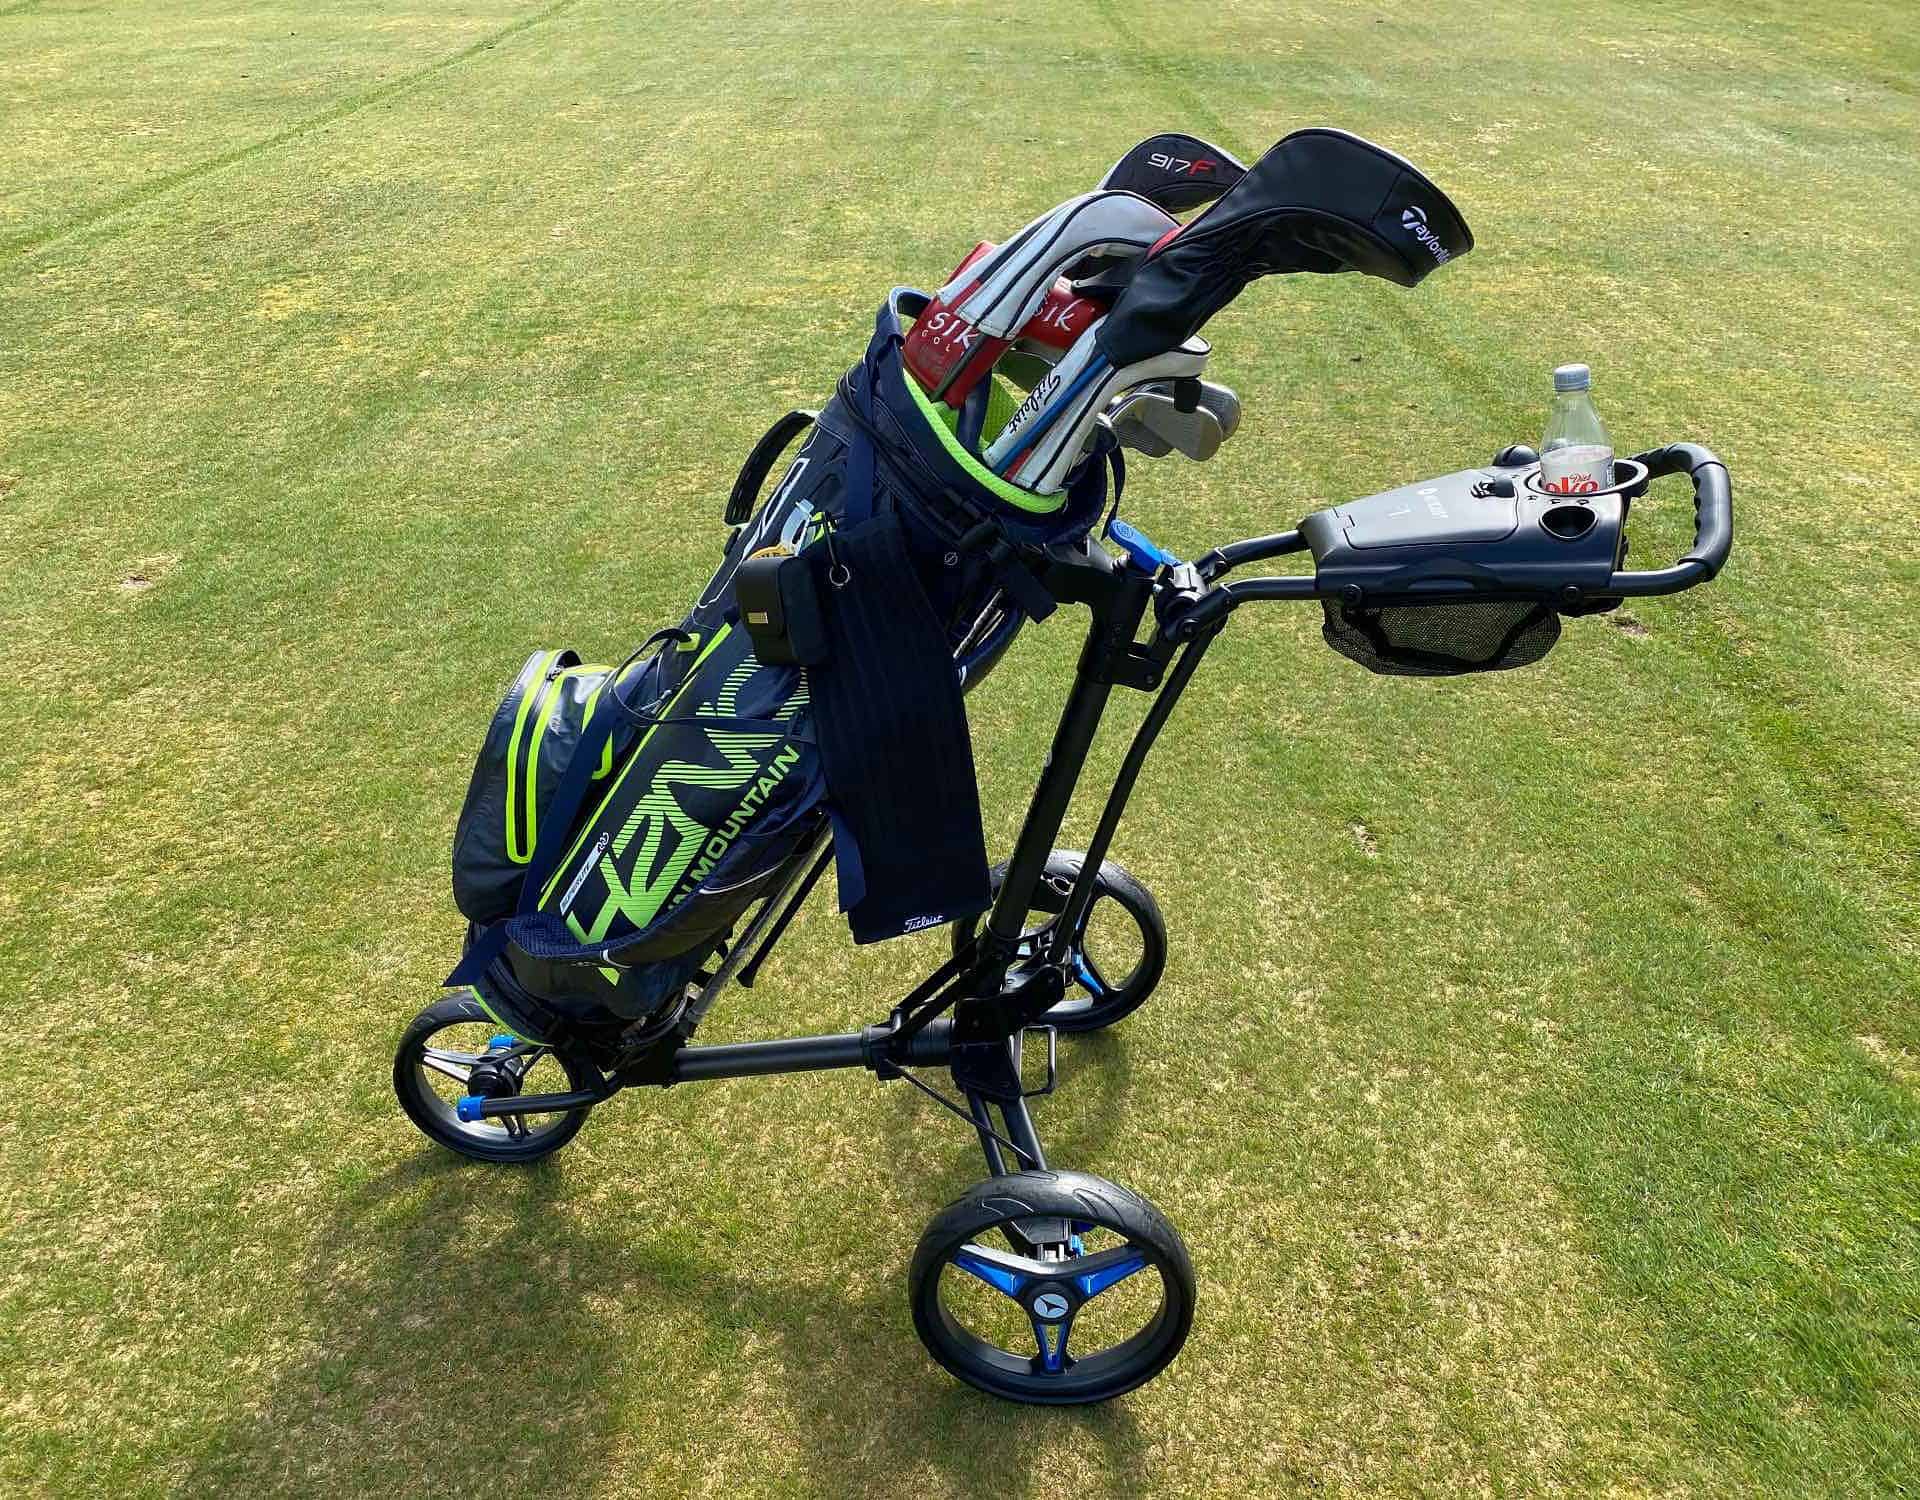 Motocaddy P1 Push Golf Trolley review